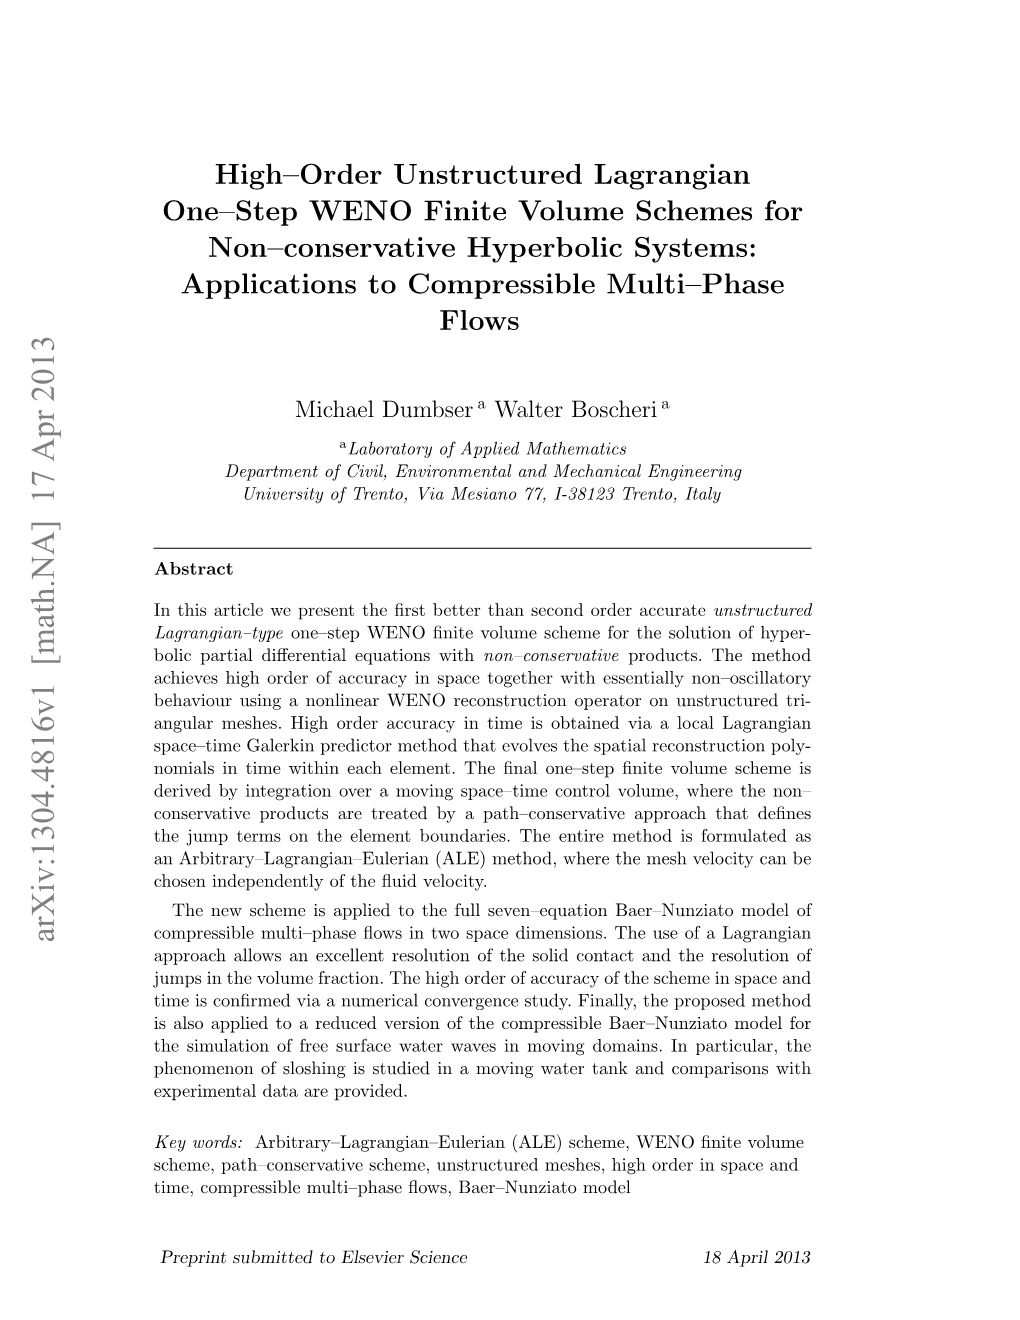 High-Order Unstructured Lagrangian One-Step WENO Finite Volume